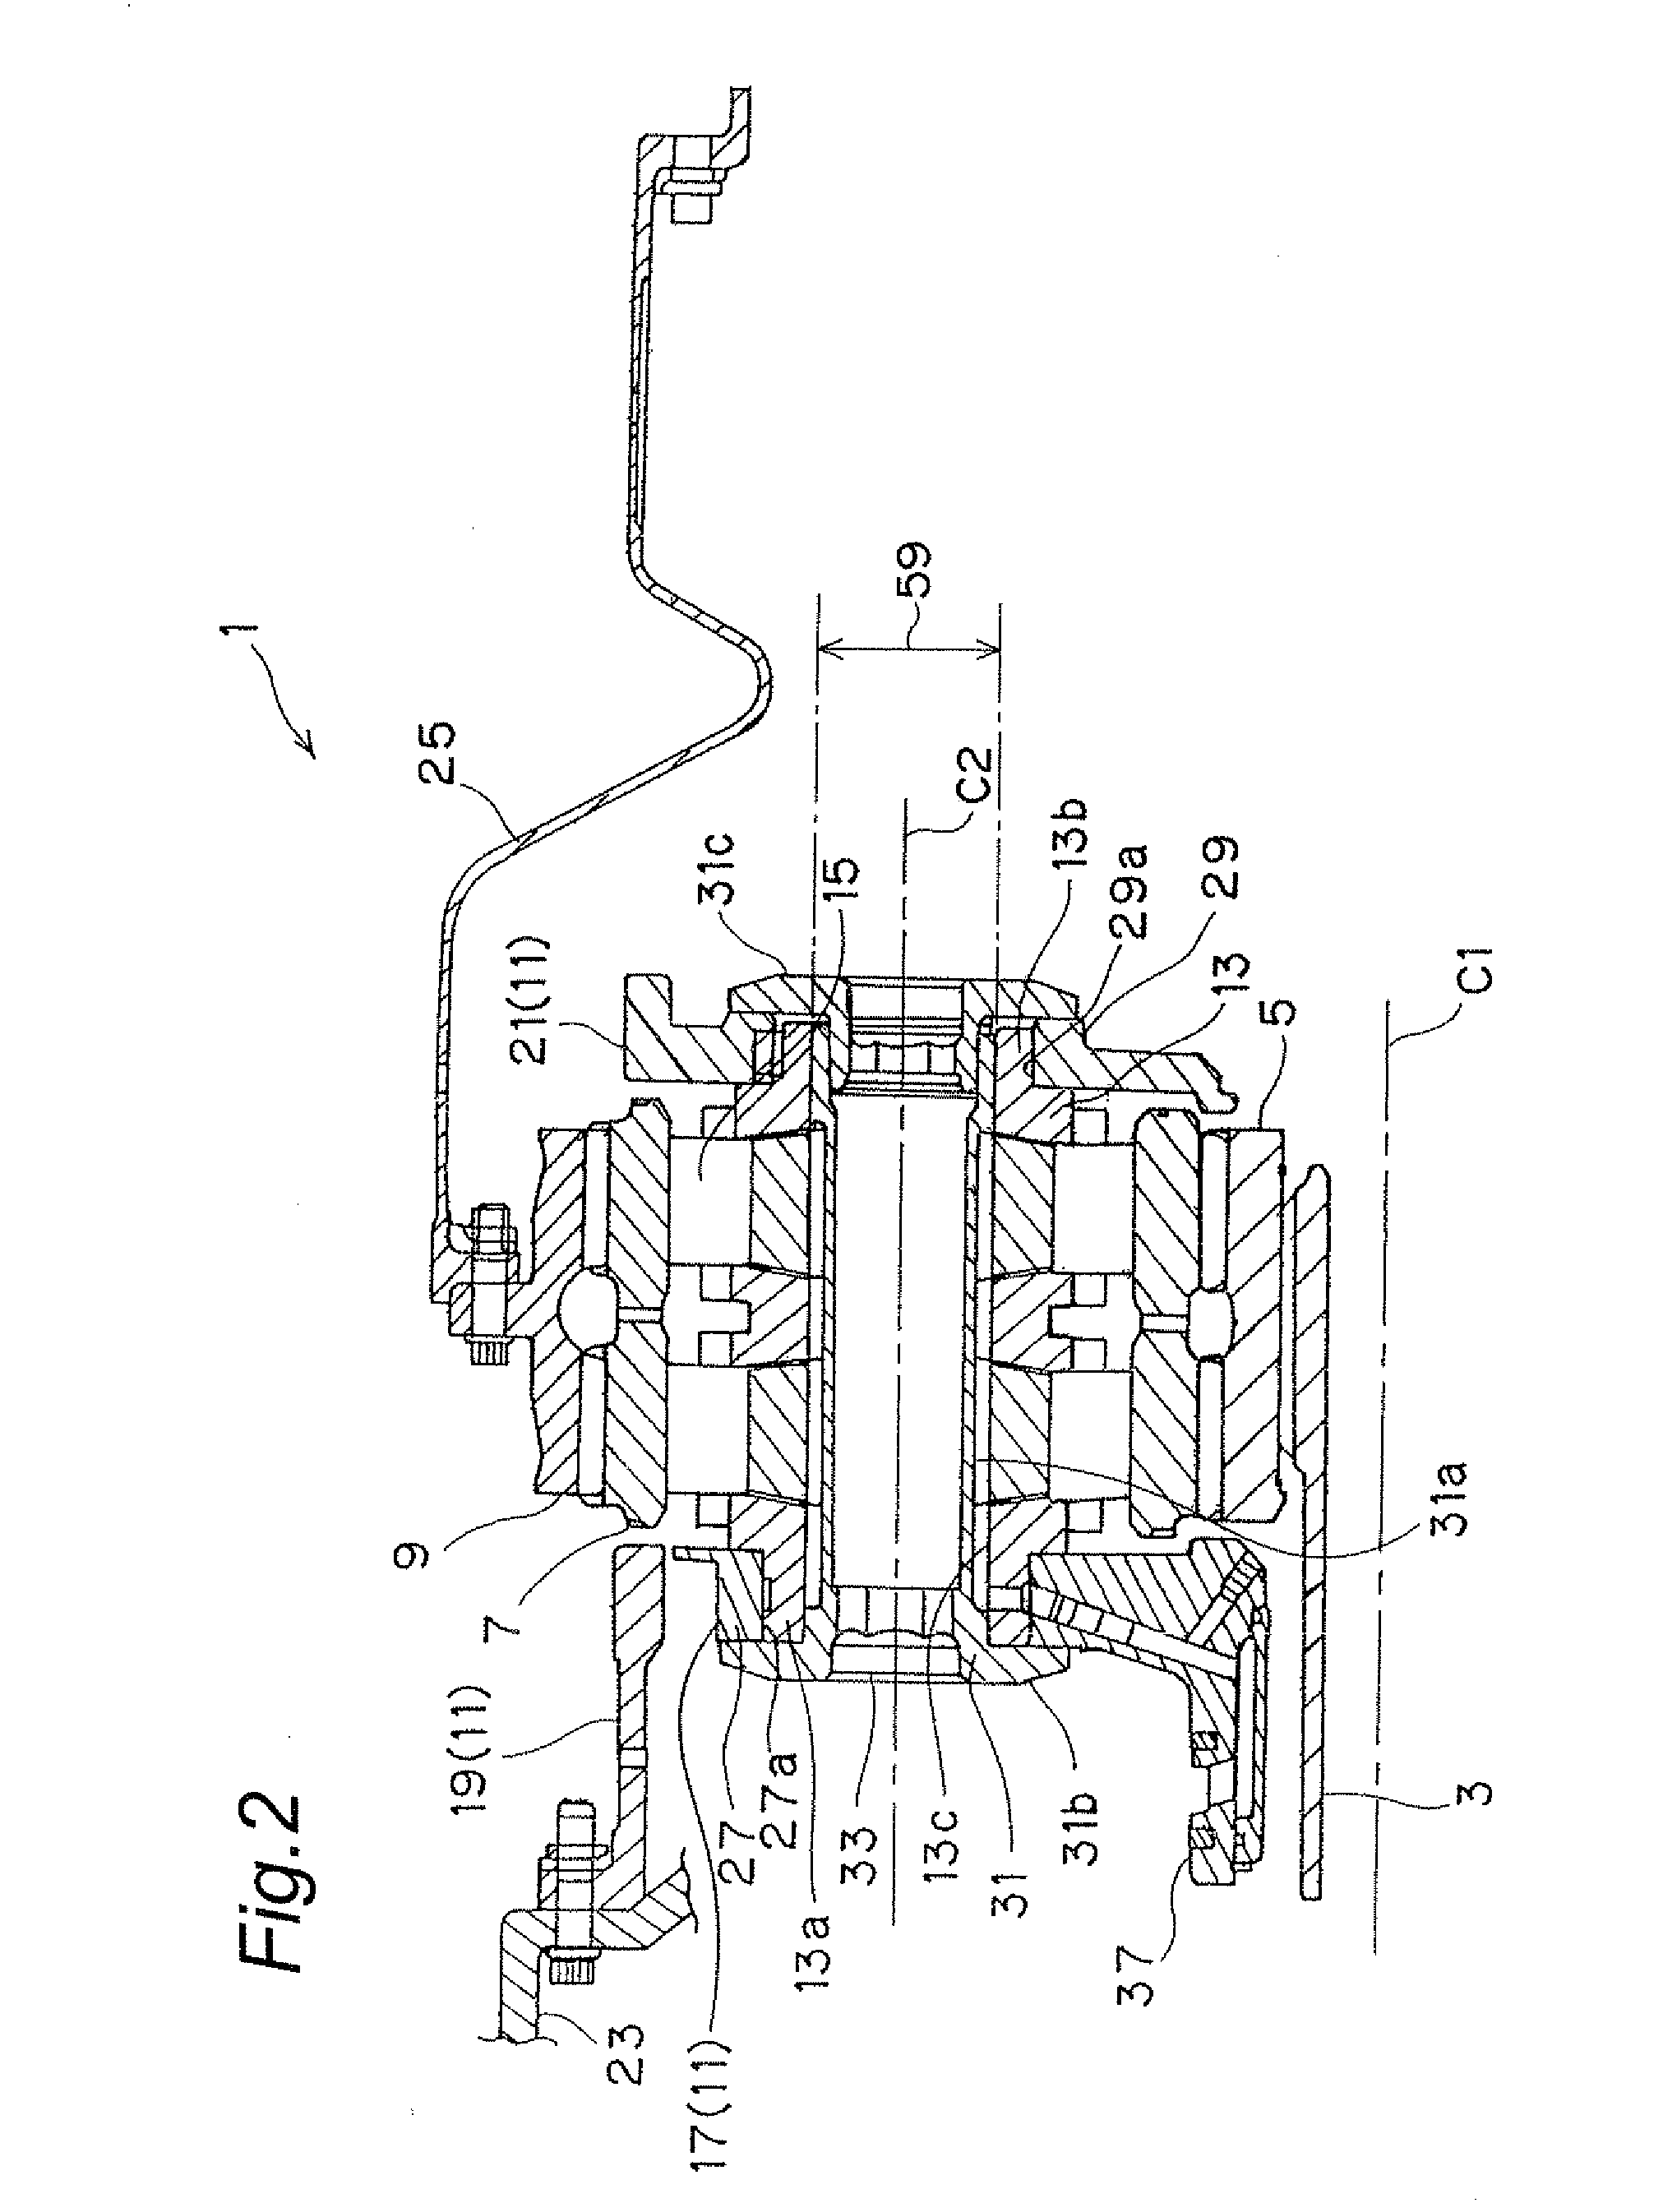 Planetary gear reduction system